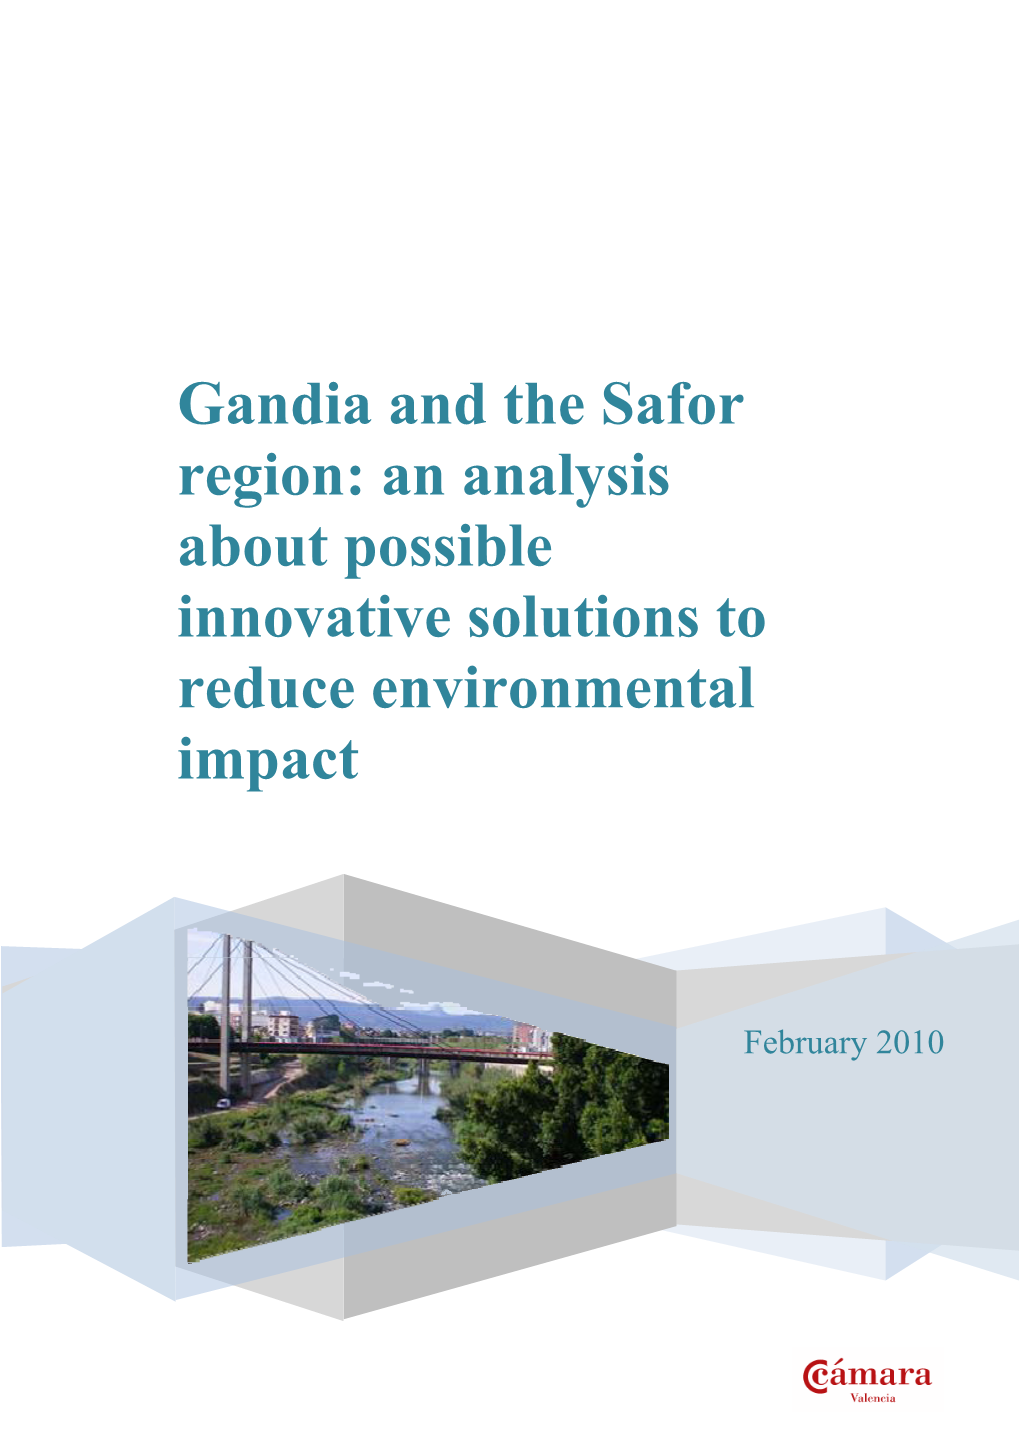 Gandia and the Safor Region: an Analysis About Possible Innovative Solutions to Reduce Environmental Impact